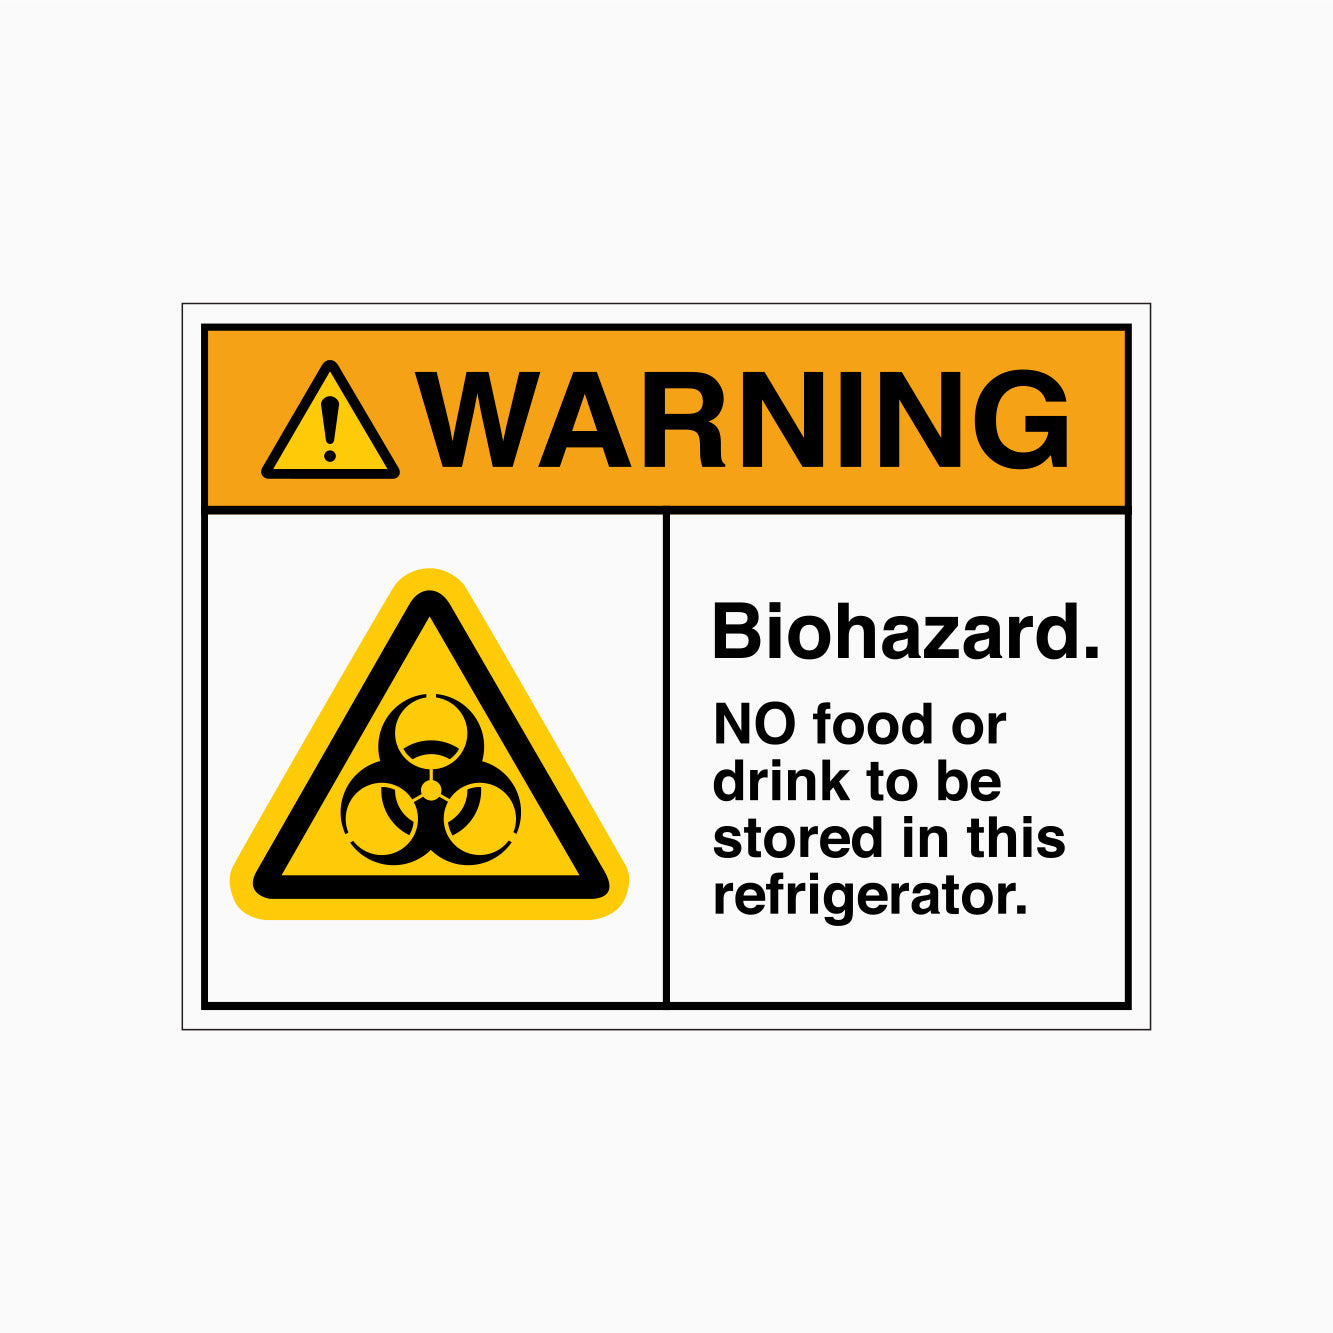 BIOHAZARD - NO FOOD OR DRINK TO BE STORED IN THIS REFRIGERATOR SIGN - WARNING SIGN